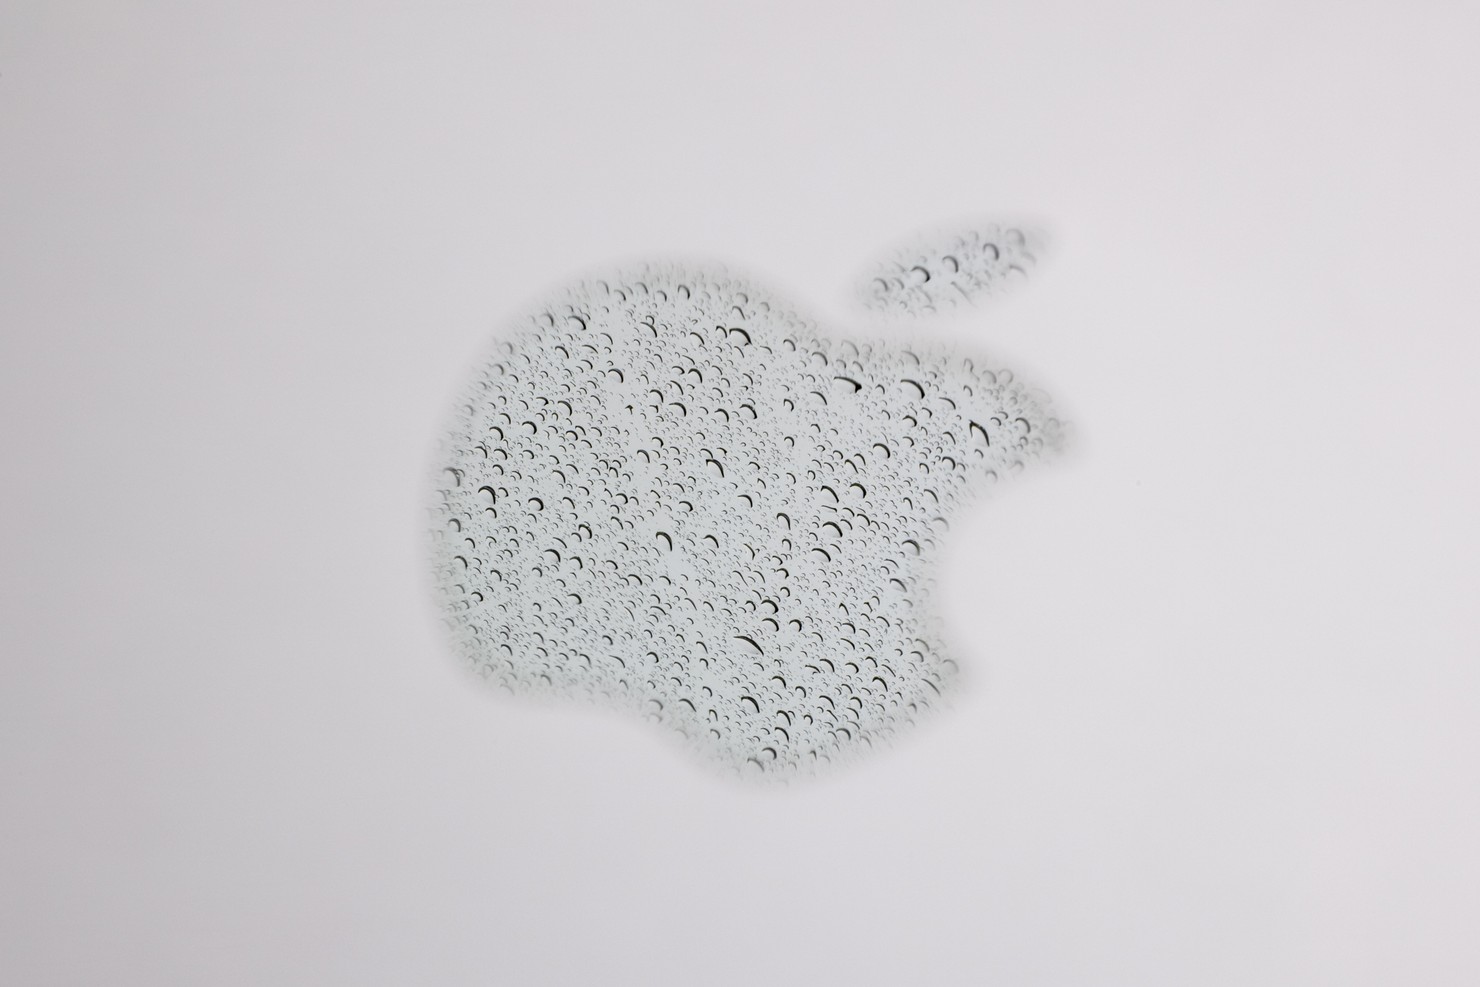 A reflection of rain in the Apple logo on a laptop